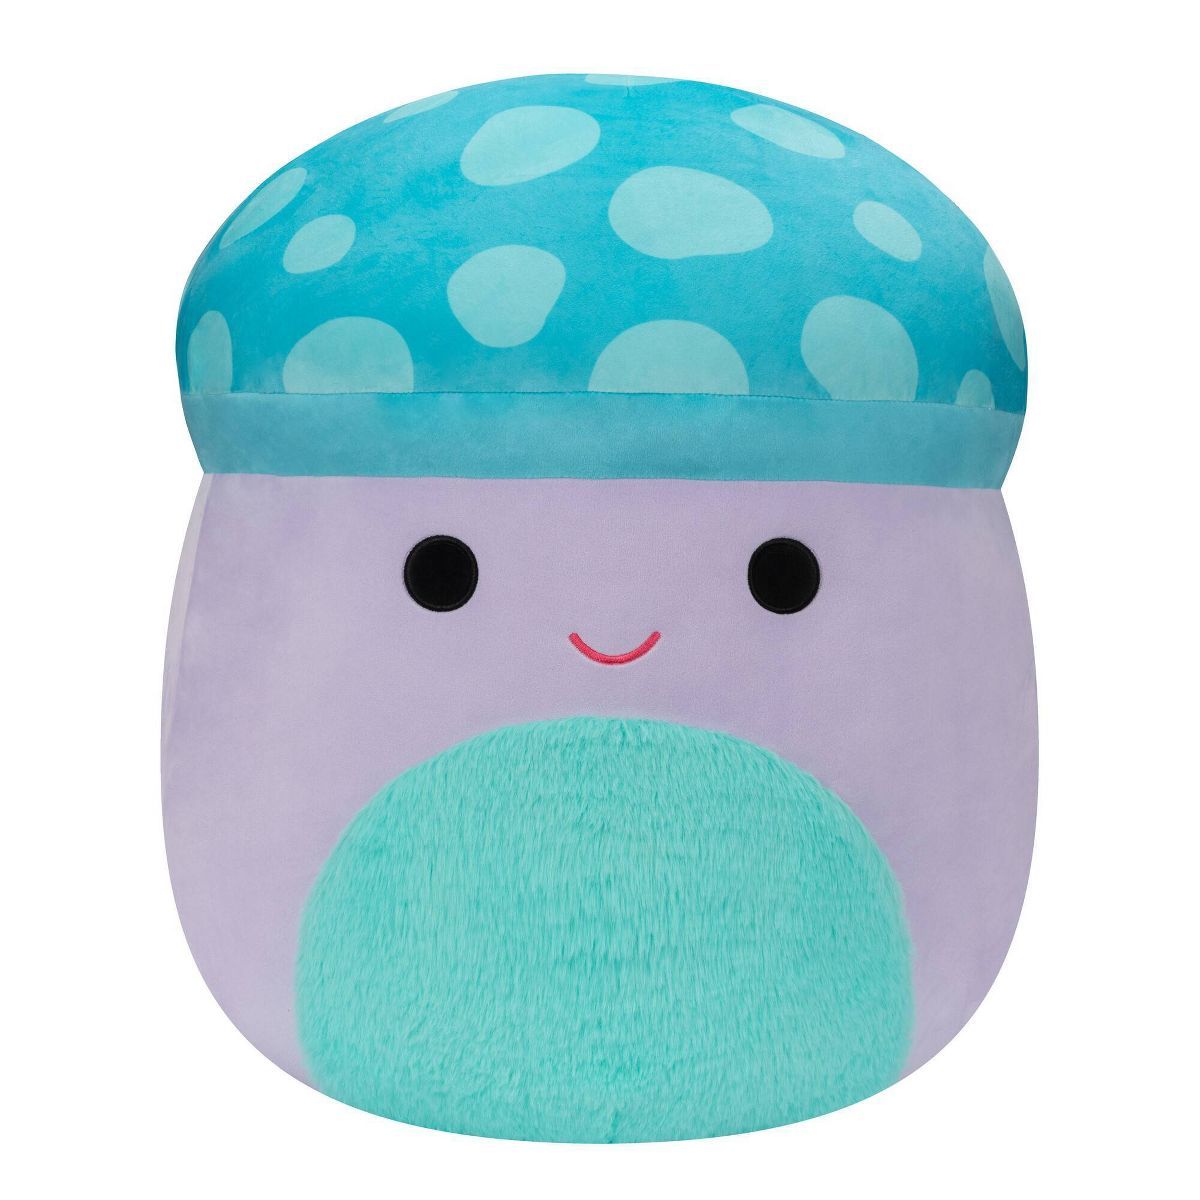 Squishmallows 20" Pyle the Purple and Blue Mushroom Plush Toy | Target